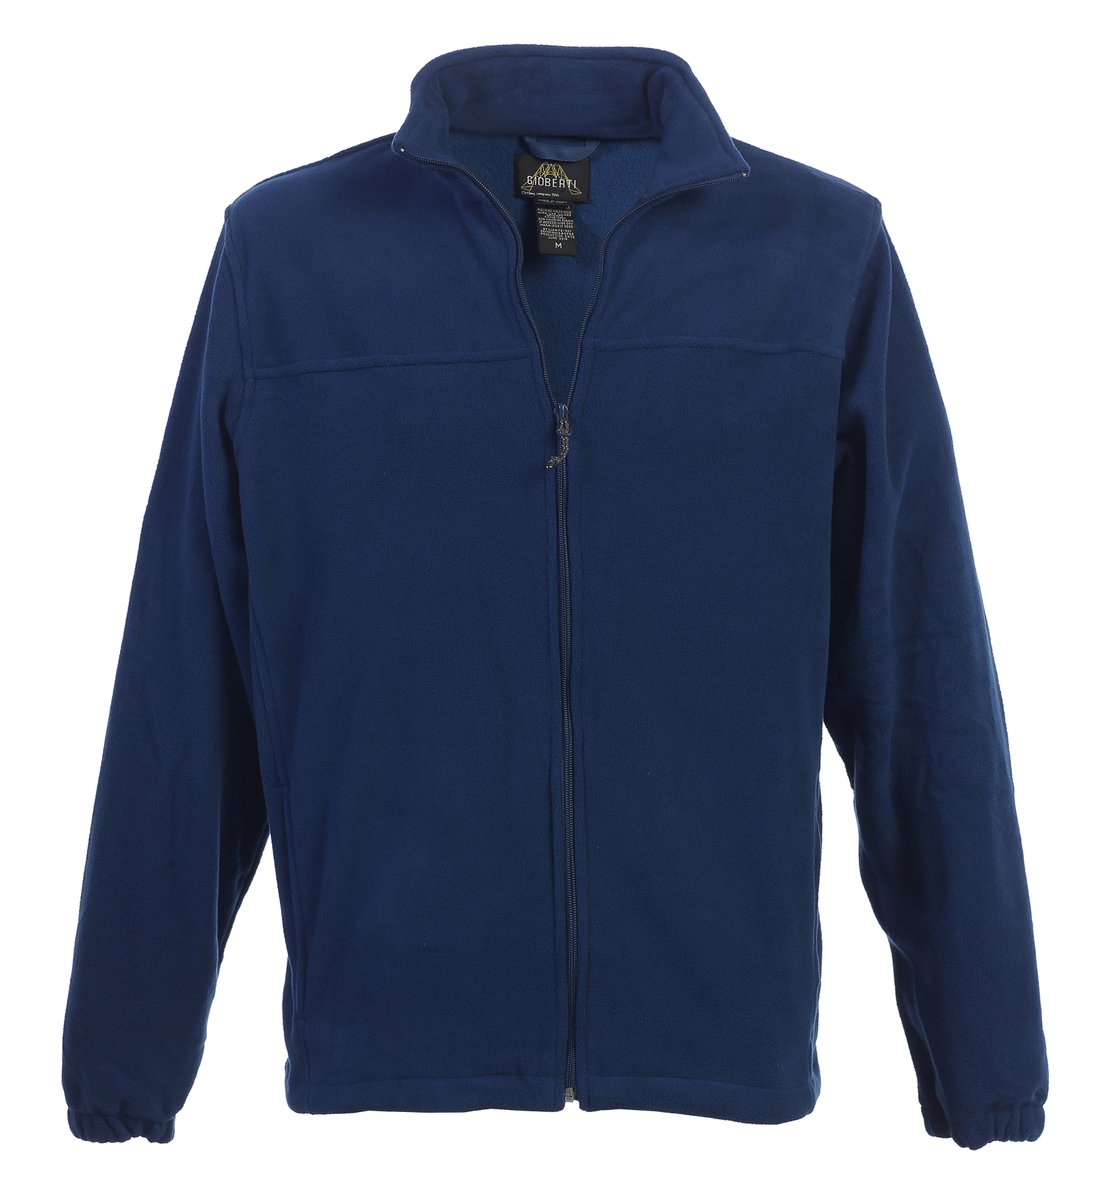 Sweatshirts and sweaters for men that rank high on comfort and style.

Check out these Gioberti Mens Full Zip Polar Fleece Sweater Jackets at gioberti.com/collections/me…

#menssweatshirts #menssweaters #fleecejacket